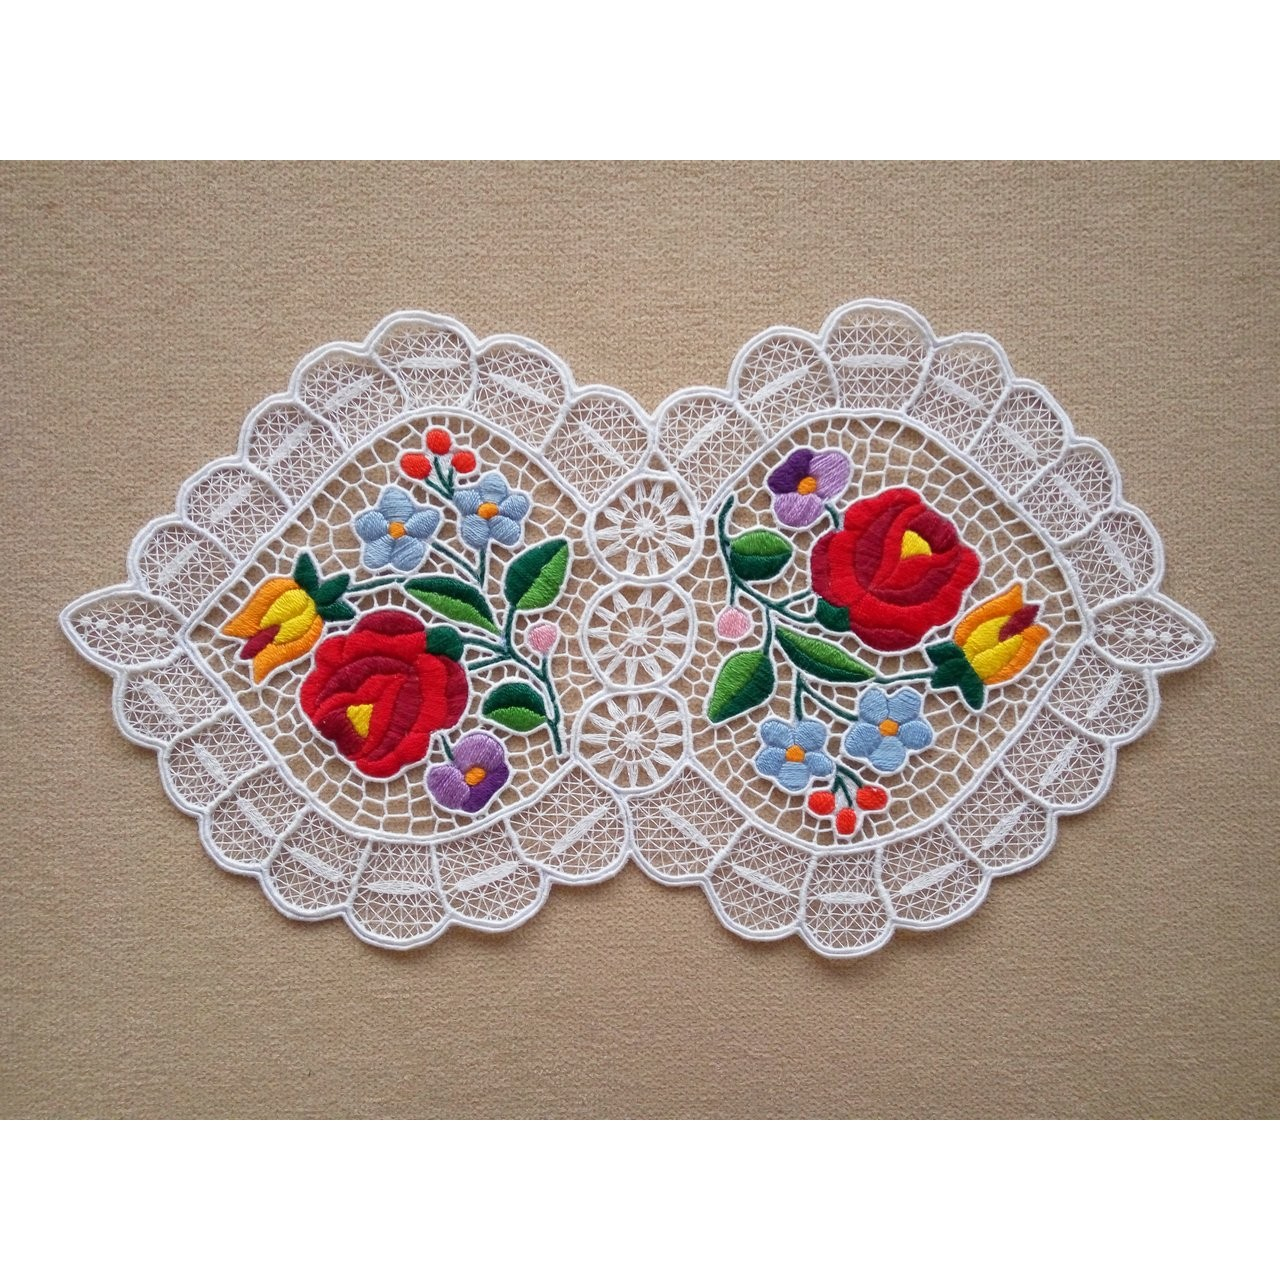 Cutwork Embroidery Patterns Handmade Cutwork Embroidered Floral Doily Richelieu Lacework With